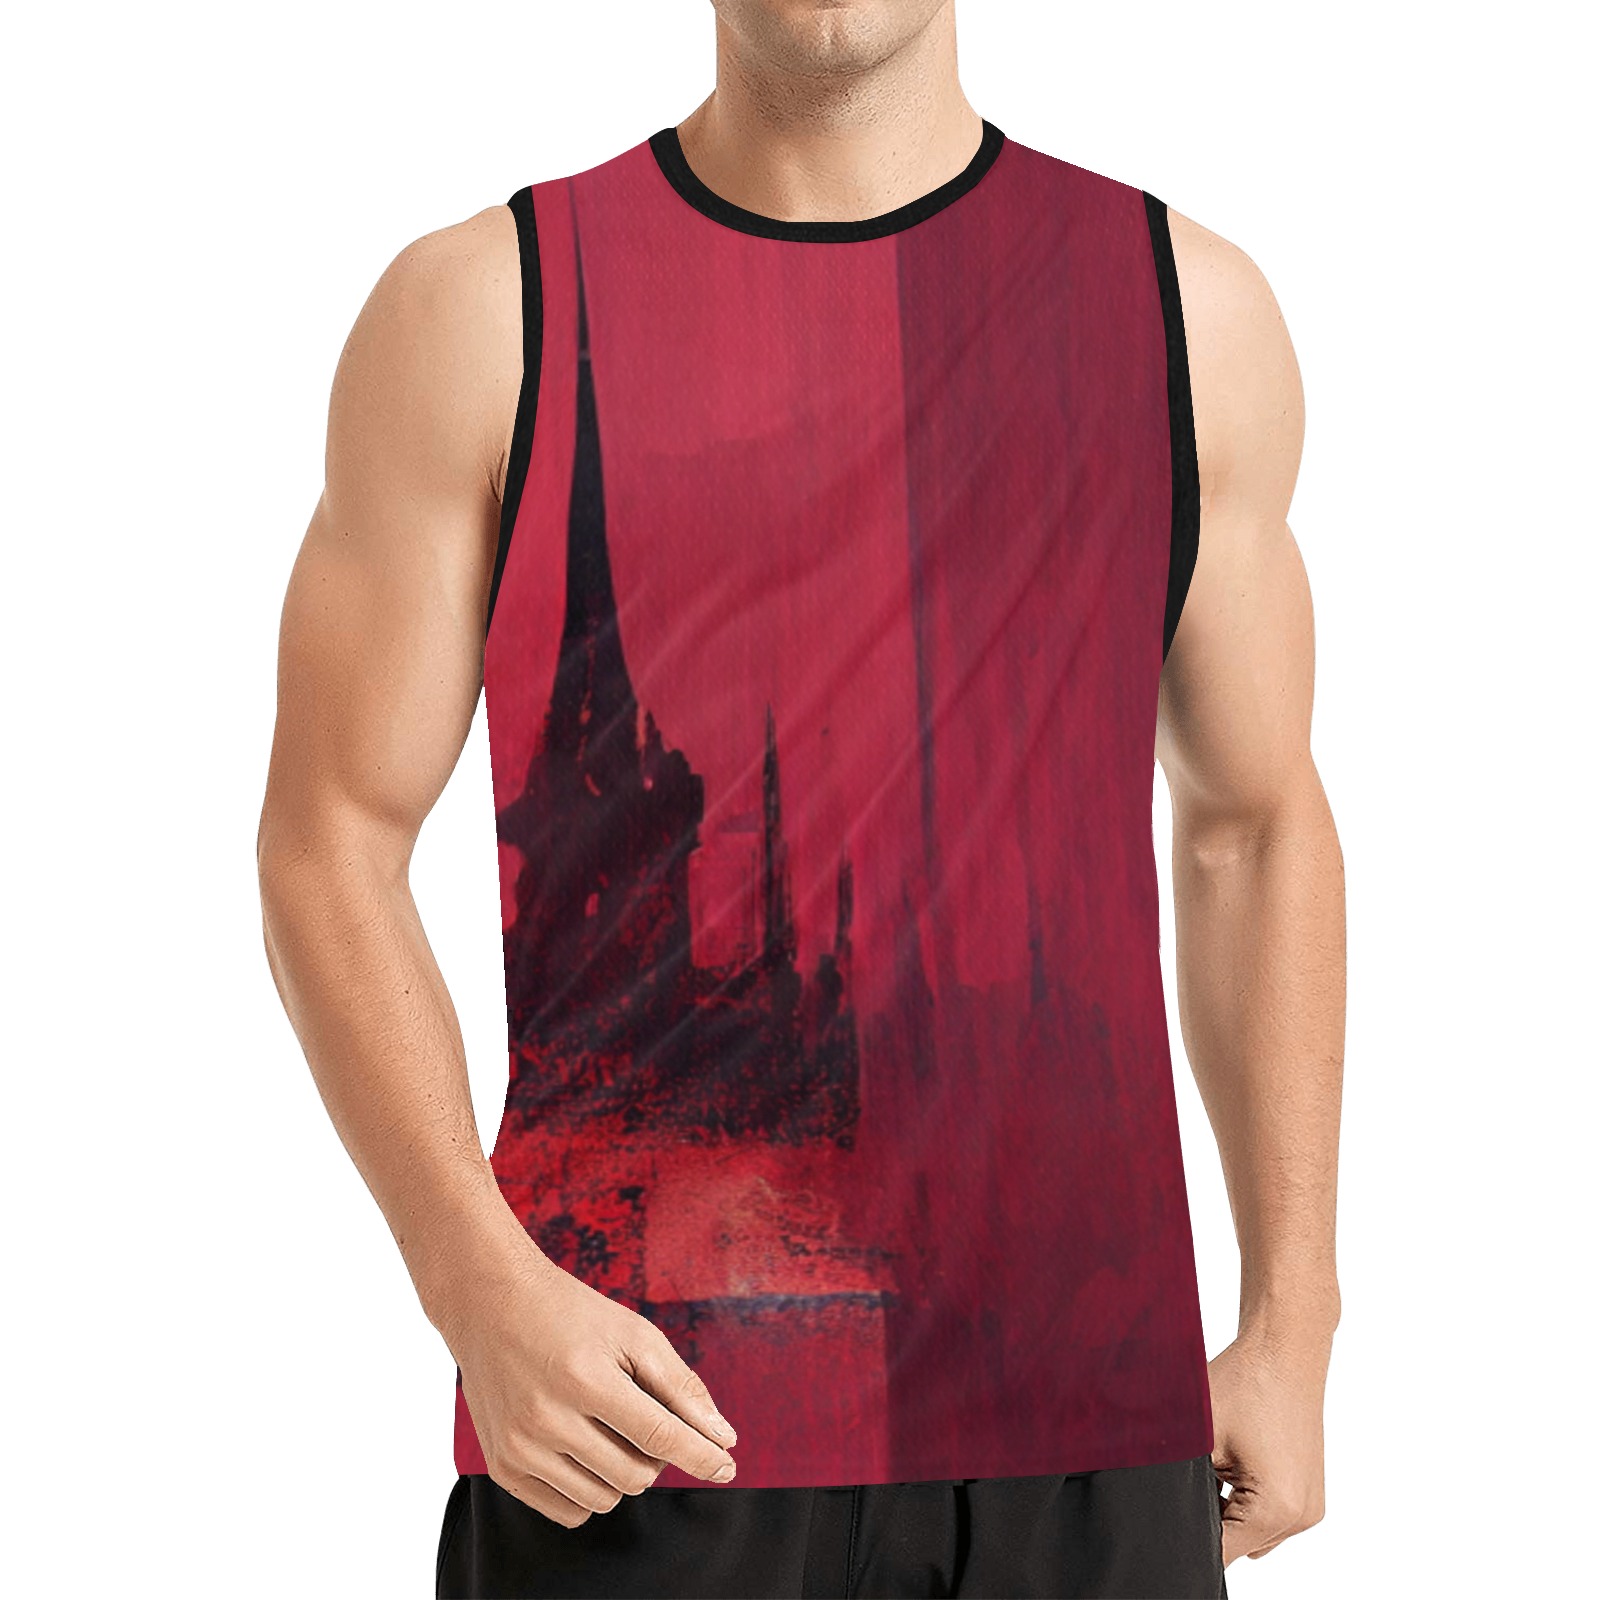 graffiti building's, red All Over Print Basketball Jersey